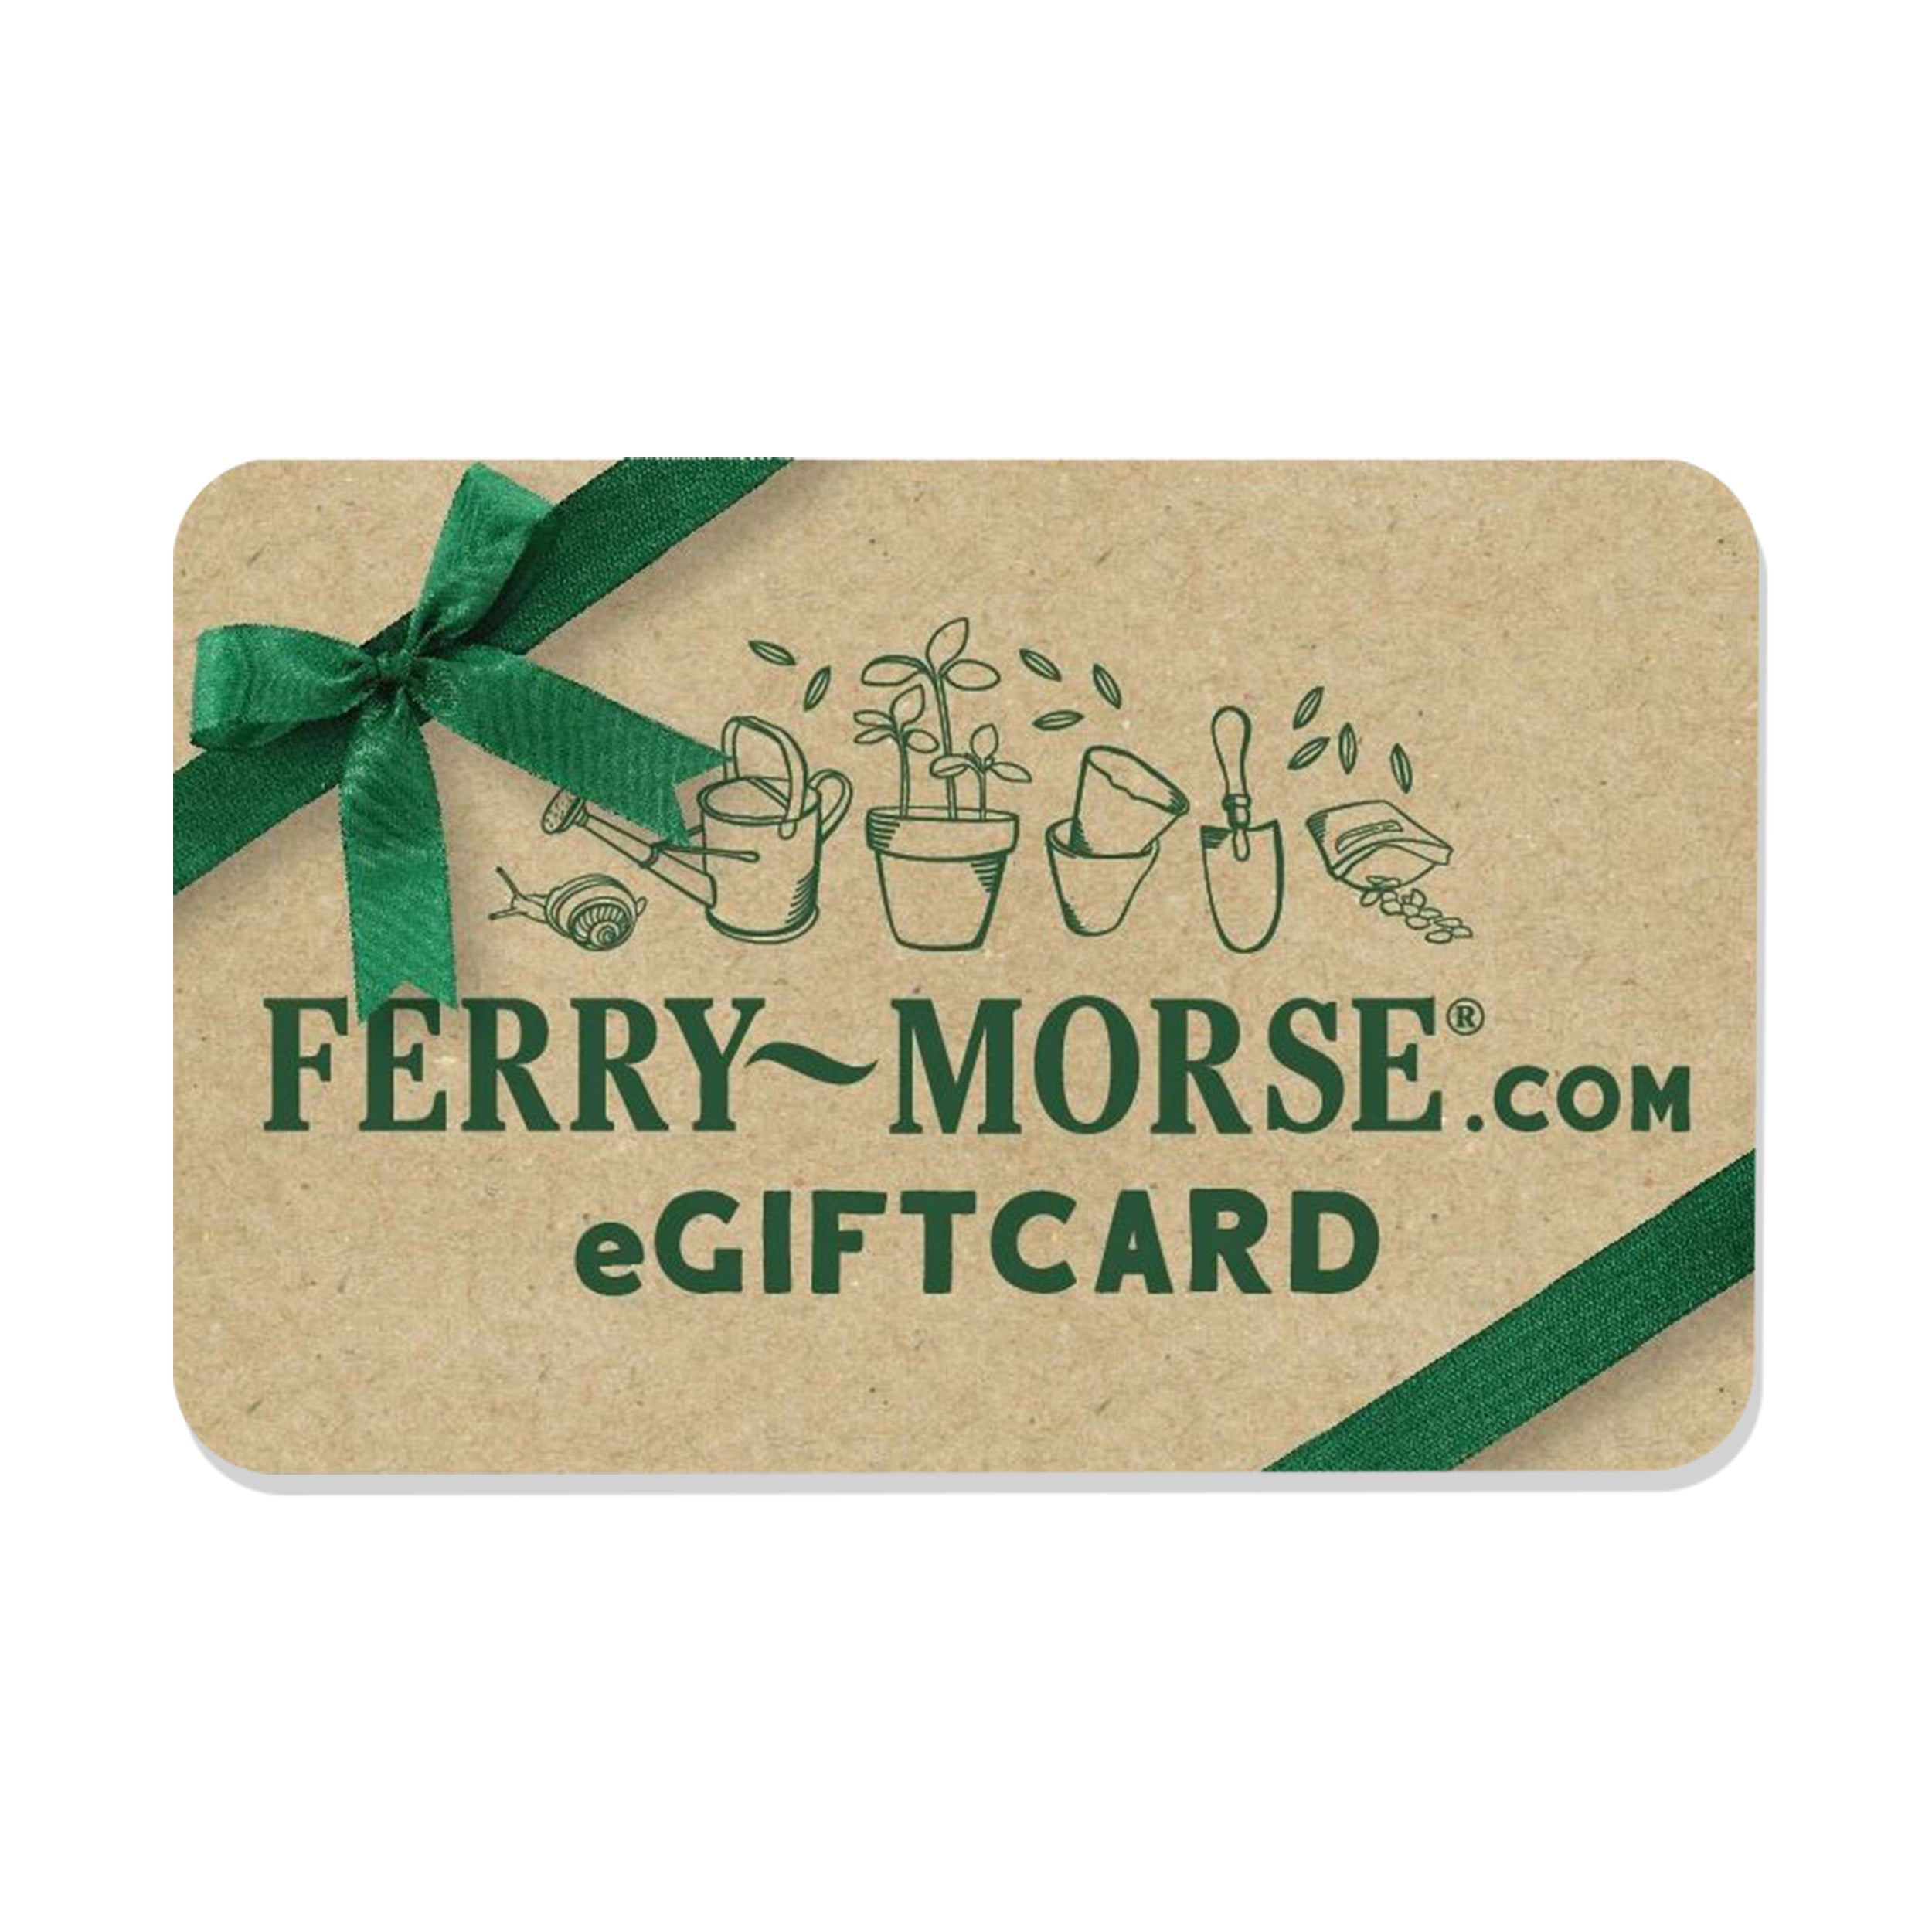 A treasure trove of FREE Gift Cards awaits you 🏴‍☠️🎁, by  FreeGiftCardWhiz